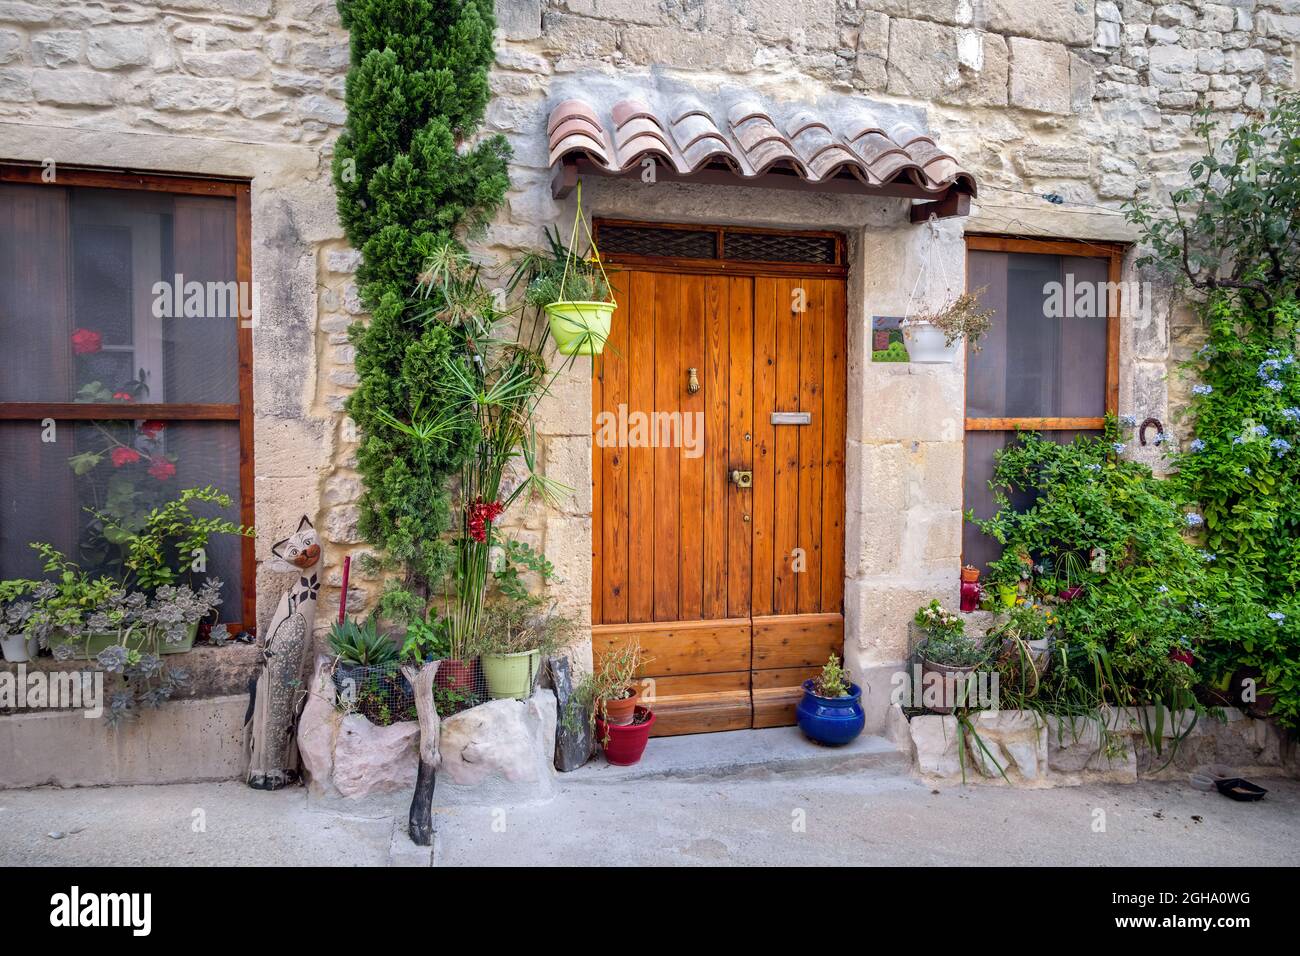 Wooden door in a street with flower pots and decorations Stock Photo